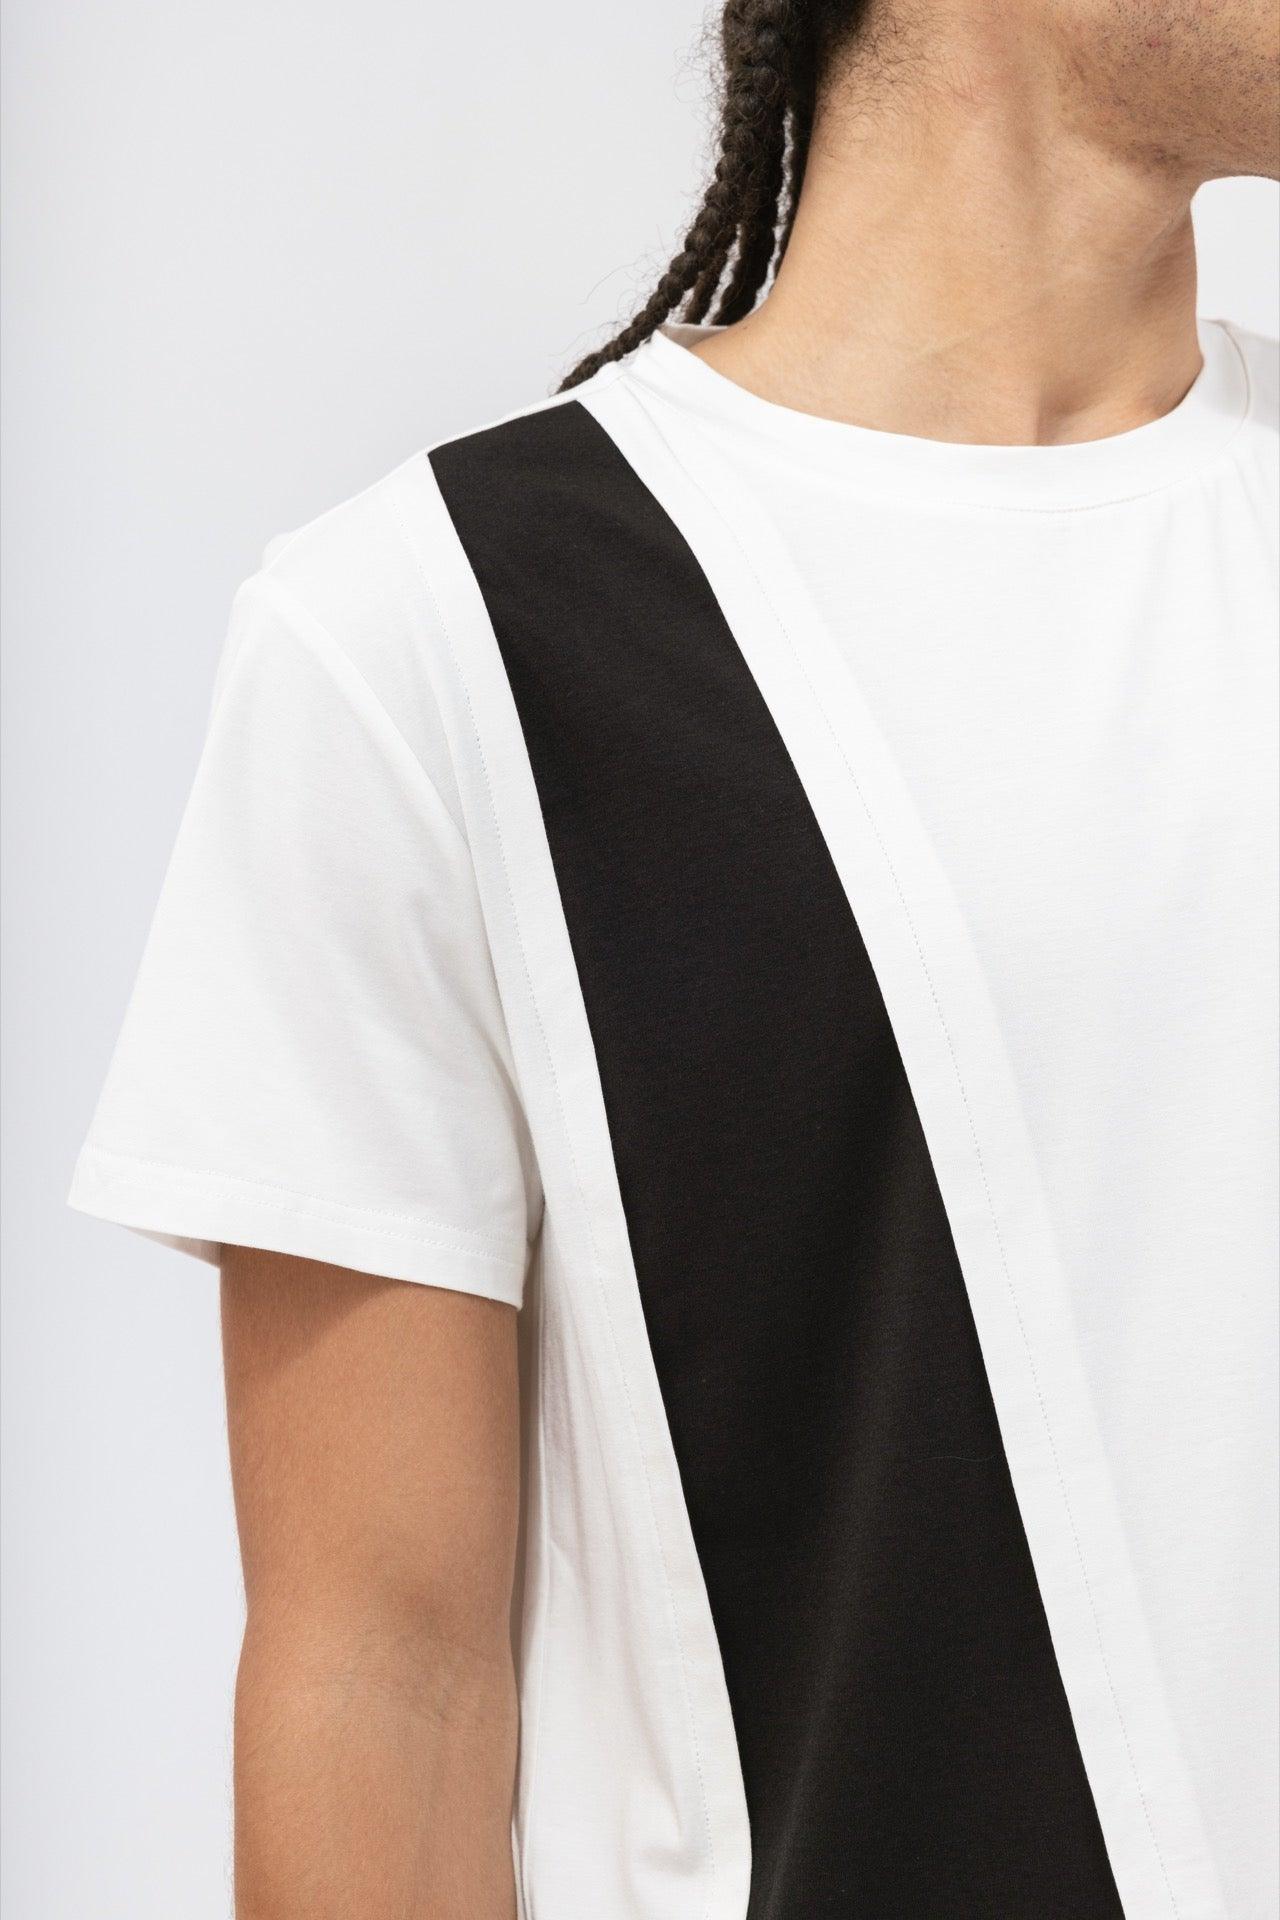 Men's Color Block Tee - NOT LABELED